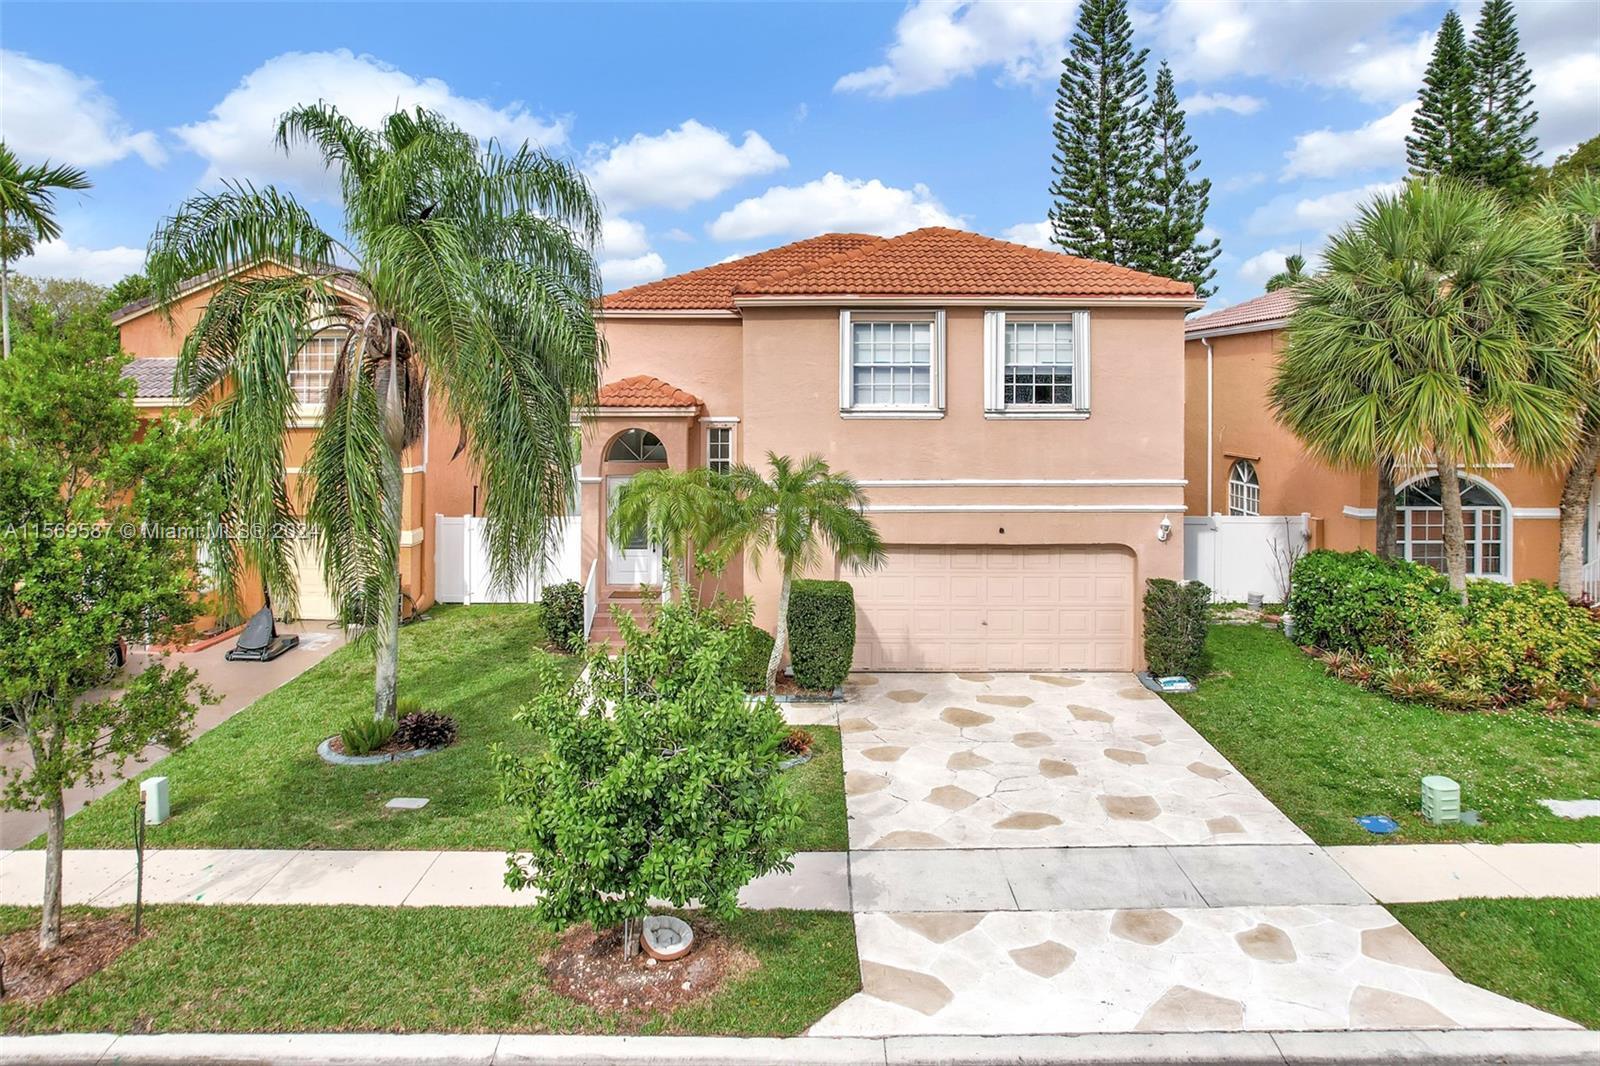 Photo of 126 NW 152nd Ave in Pembroke Pines, FL